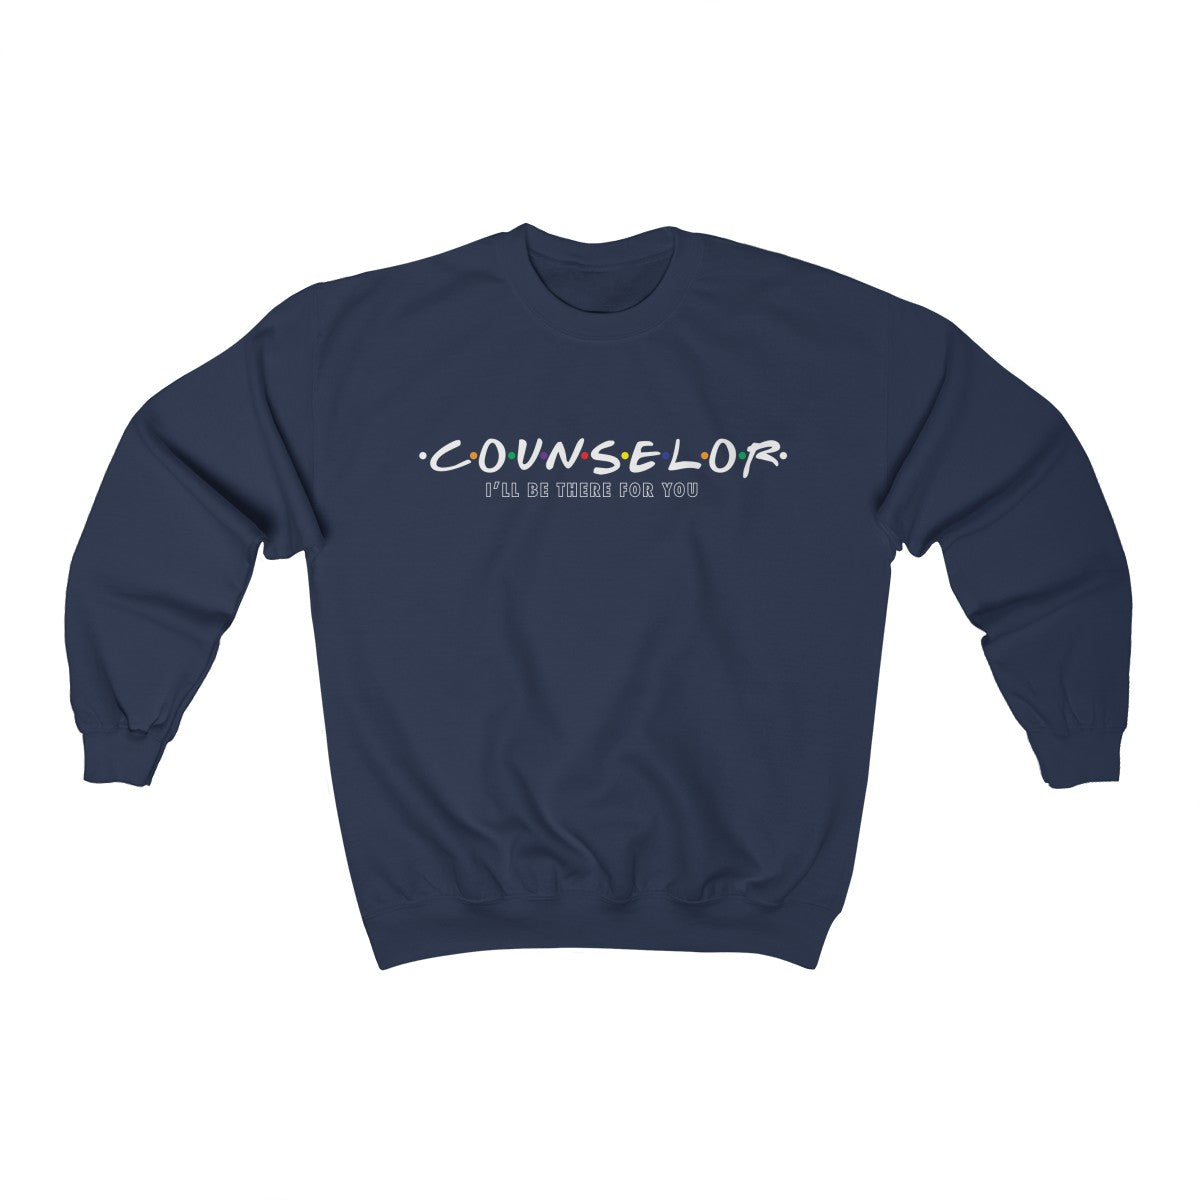 Counselor - I'll Be There For You - Crewneck Sweatshirt